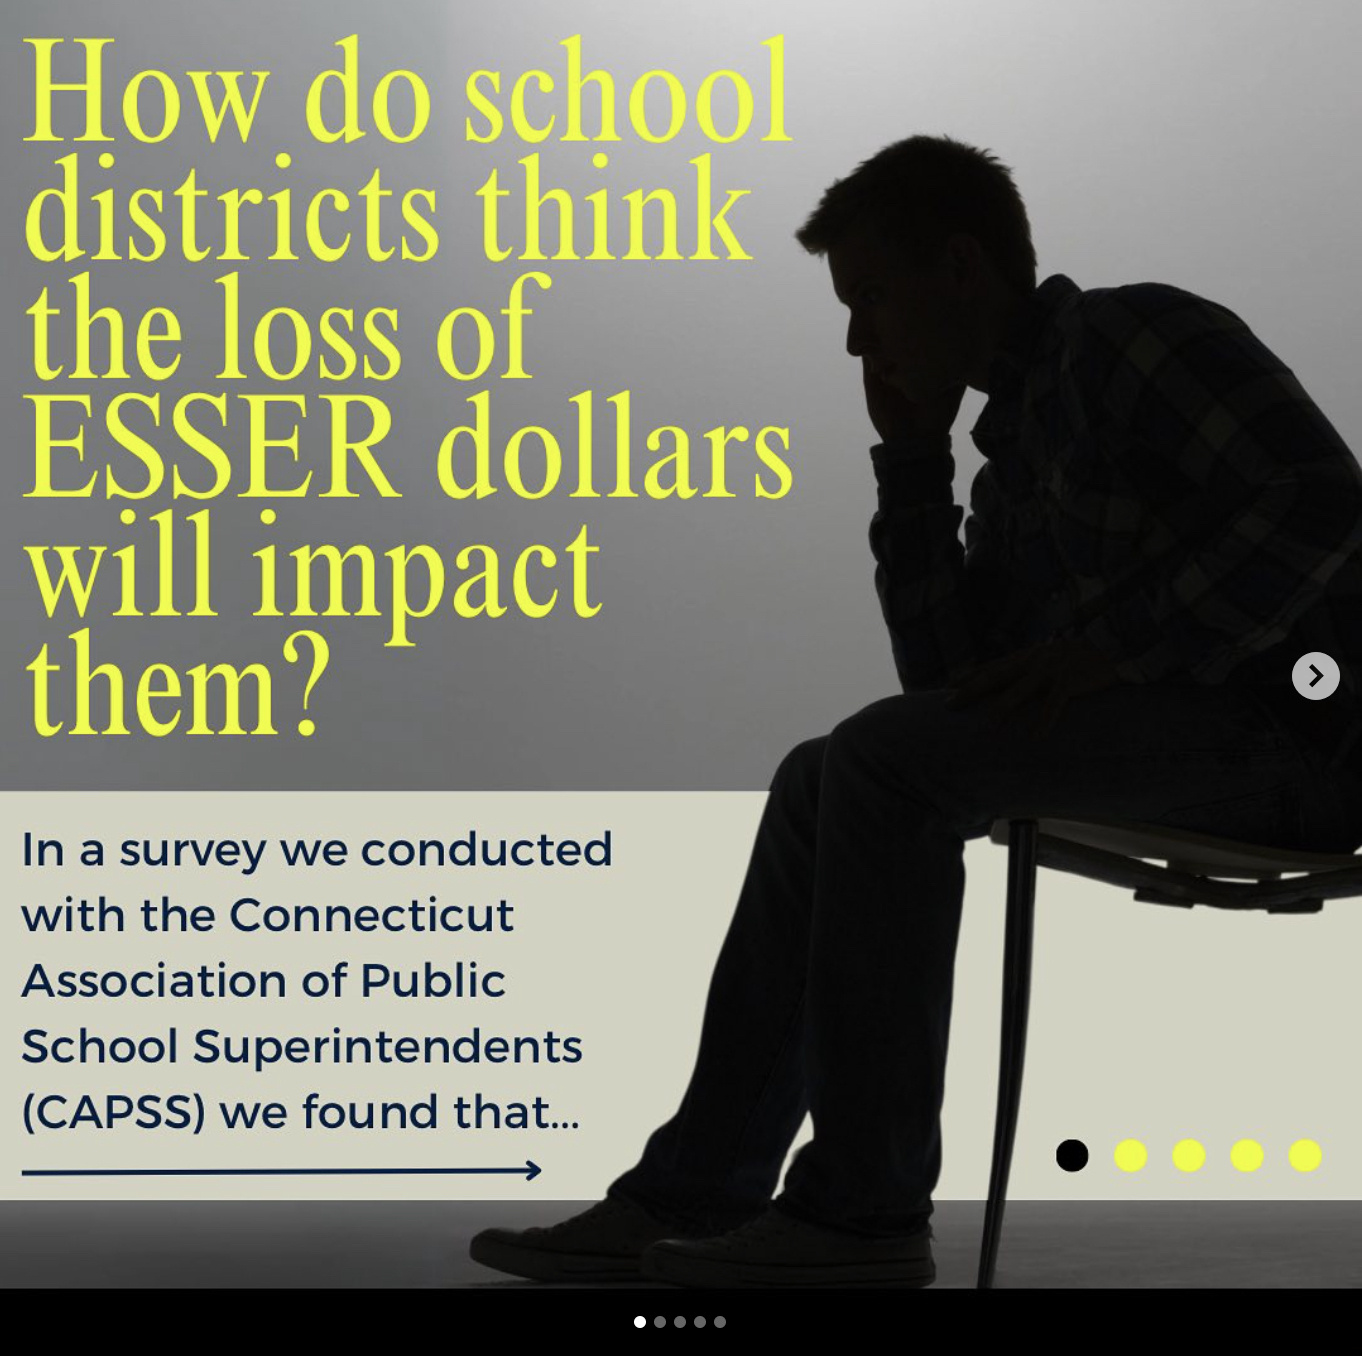 Graphic summarizing how the loss of ESSER dollars will impact school districts.